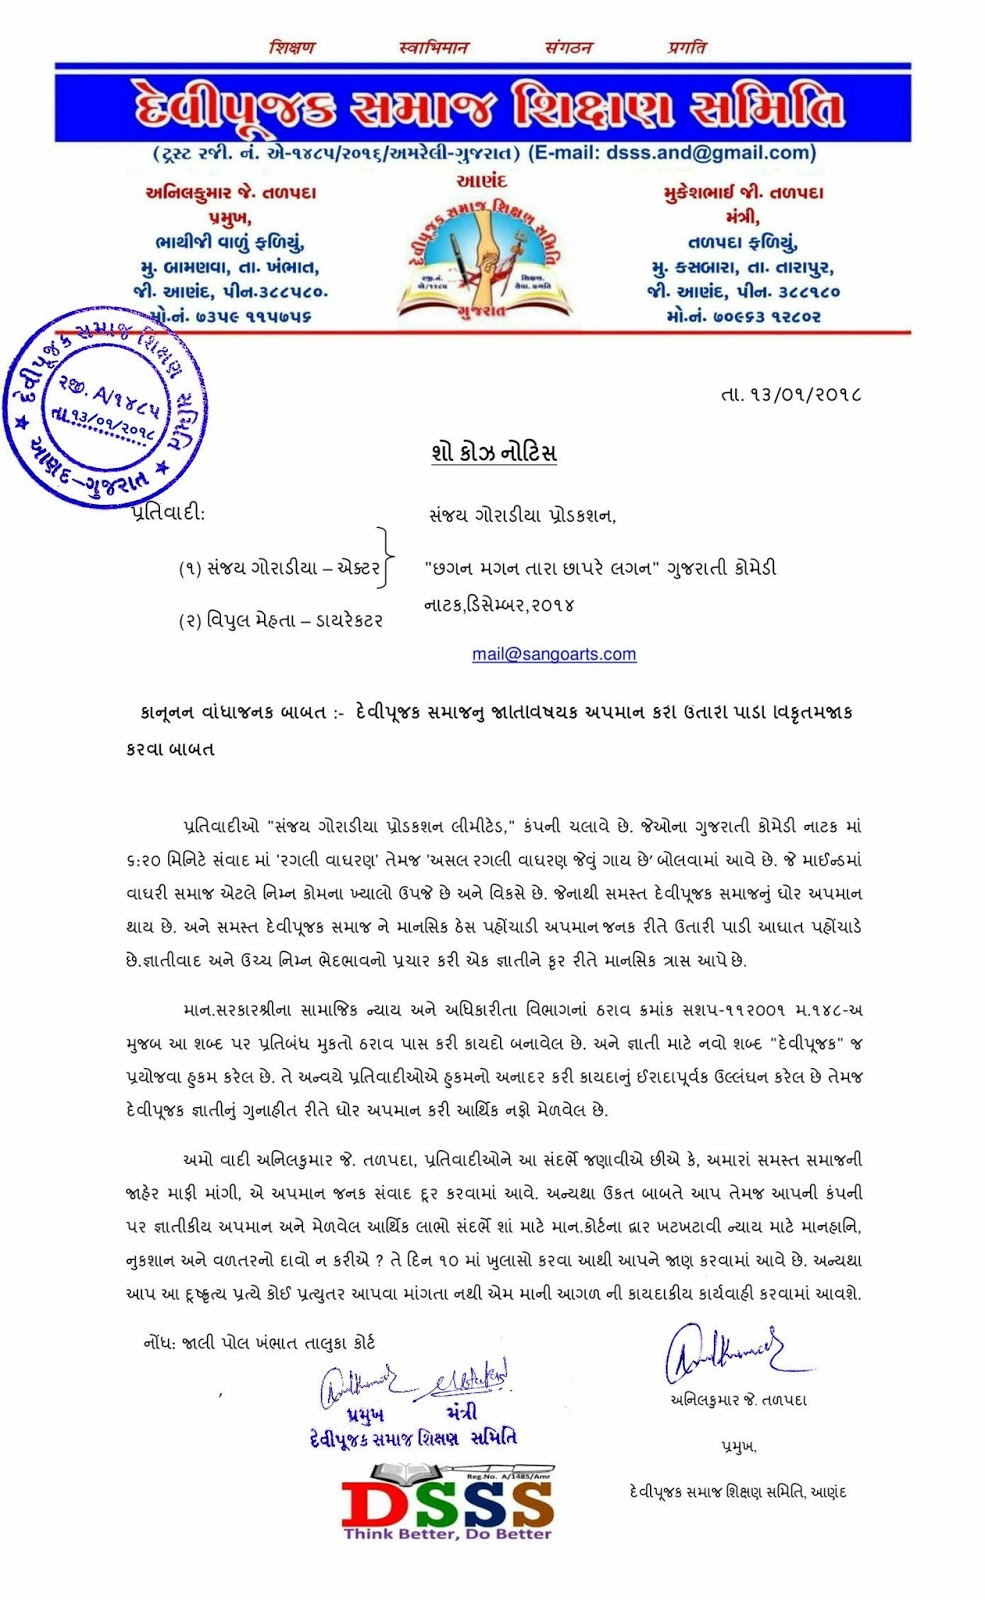 DSSS Issued Show Cause Notice To Sanjay Goradia